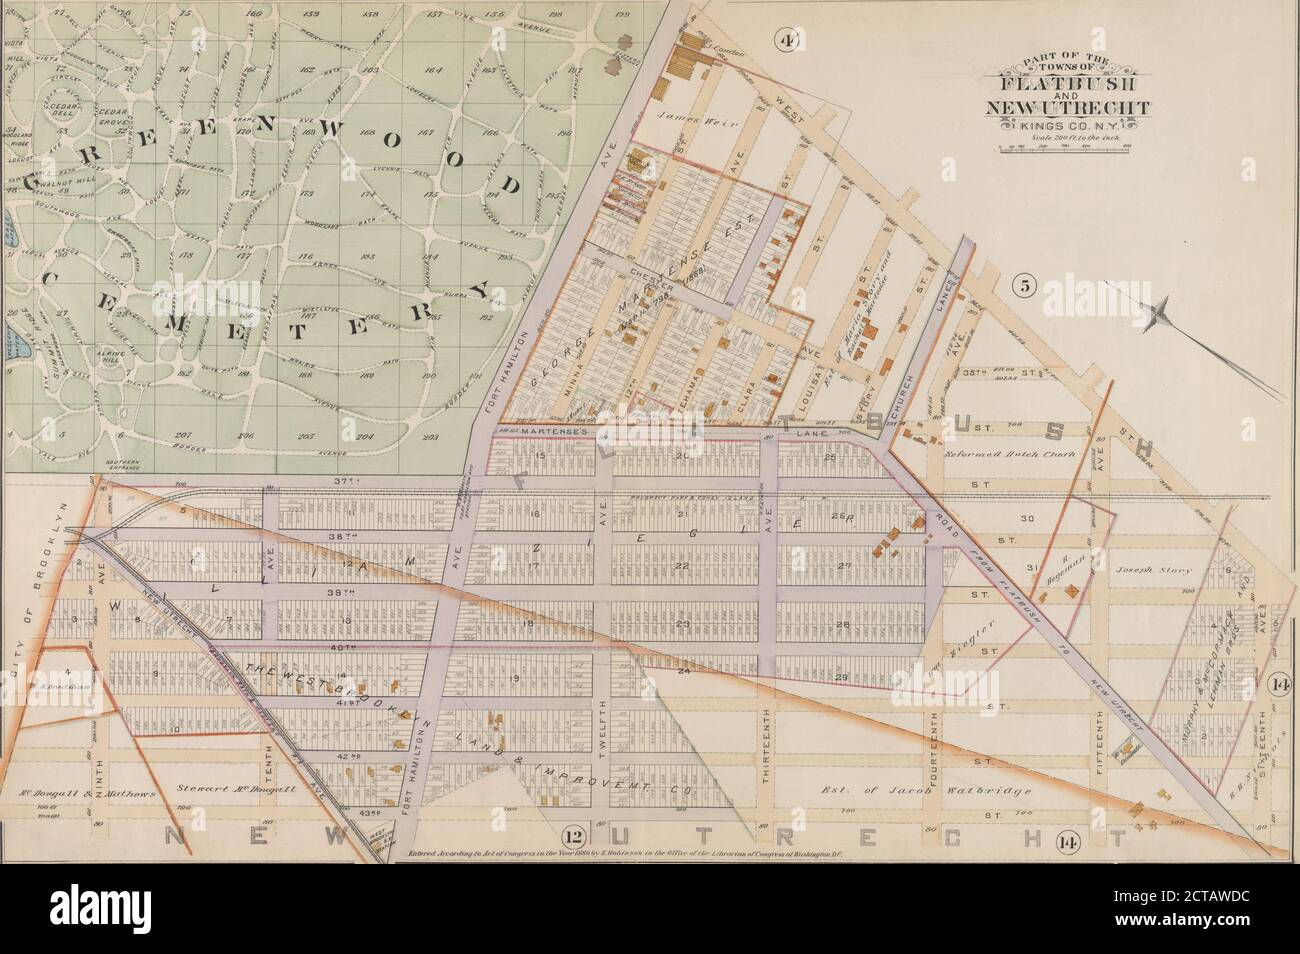 Plate 13: Bounded by West Street, Sixteenth Avenue, 43rd Street, Ninth Avenue, 37th Street (Greenwood Cemetery) and Fort Hamilton Avenue., still image, Maps, 1890, Robinson, E. (Elisha), Mueller, A. H. (August H Stock Photo